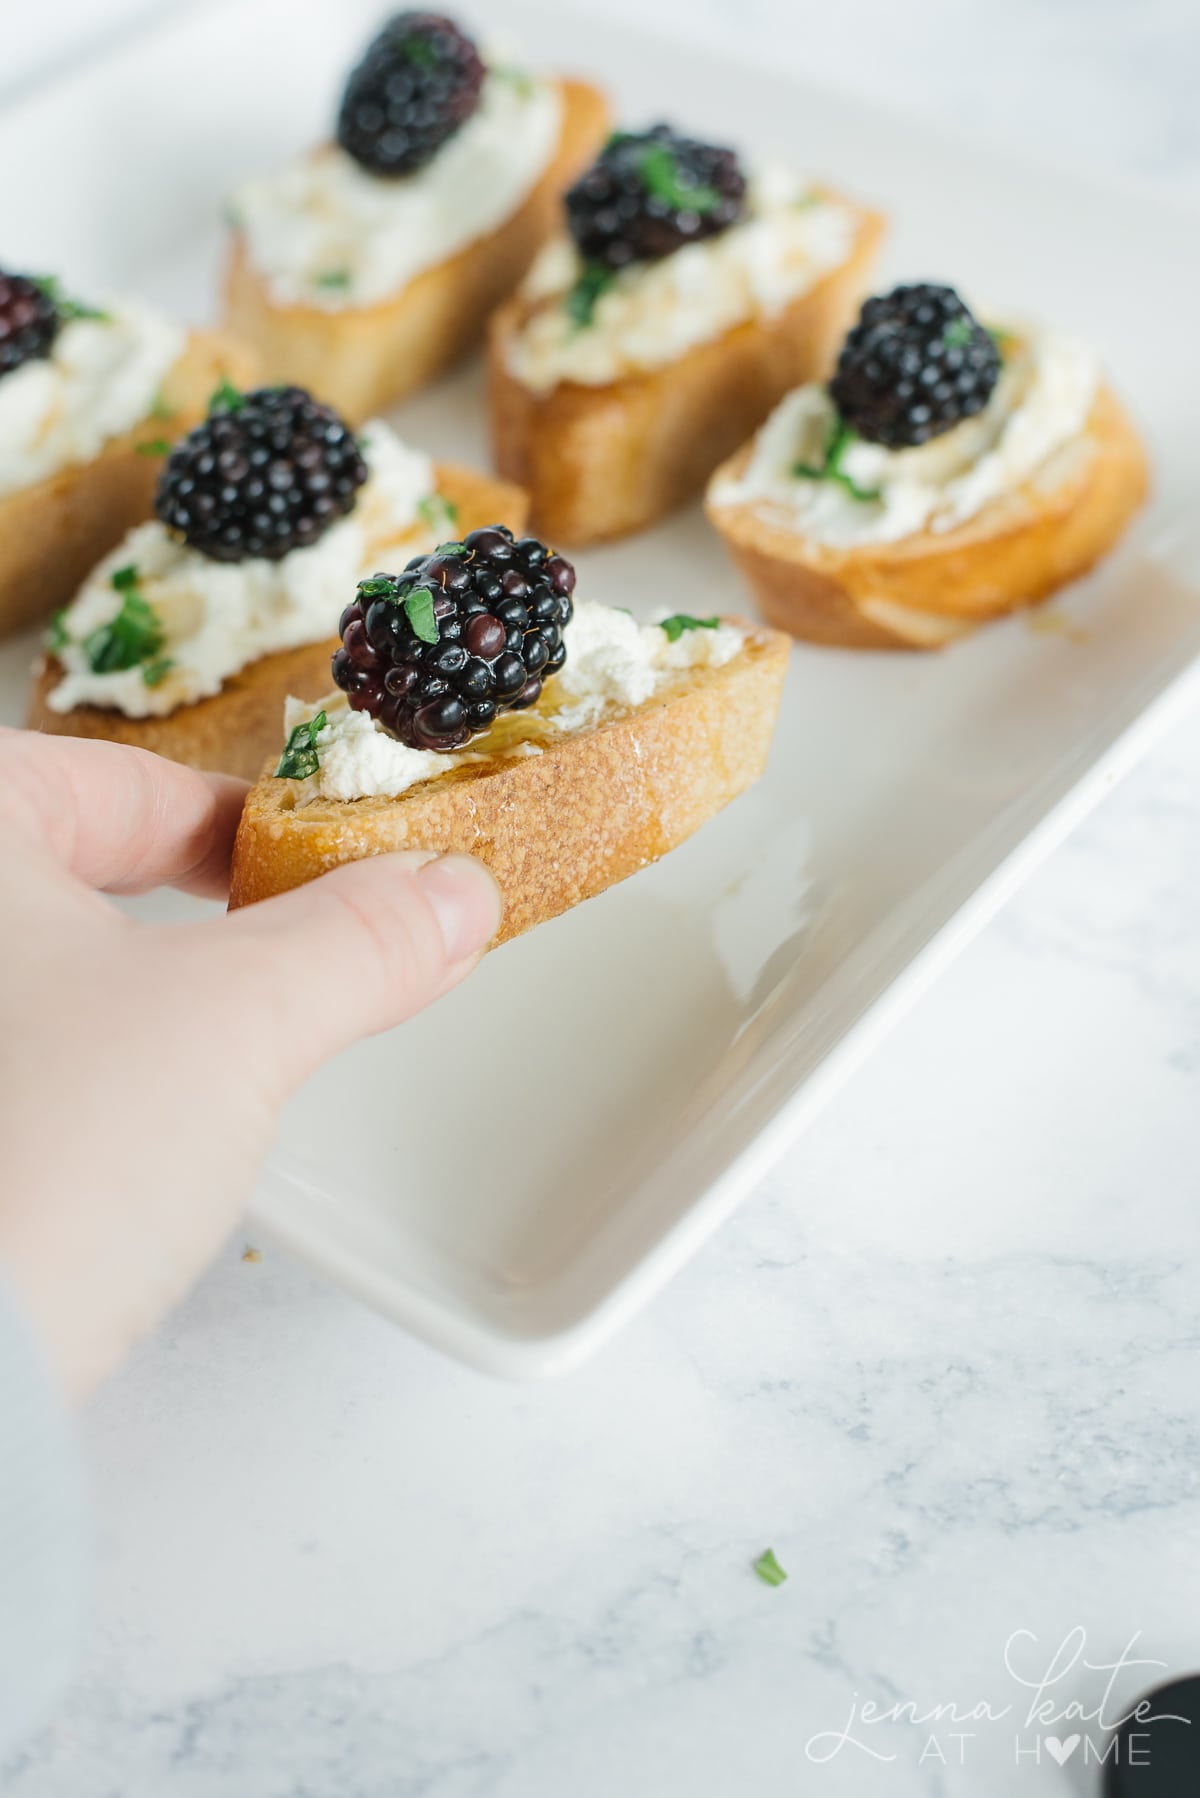 Hand picking up one of the blackberry and goat cheese crostini appetizers